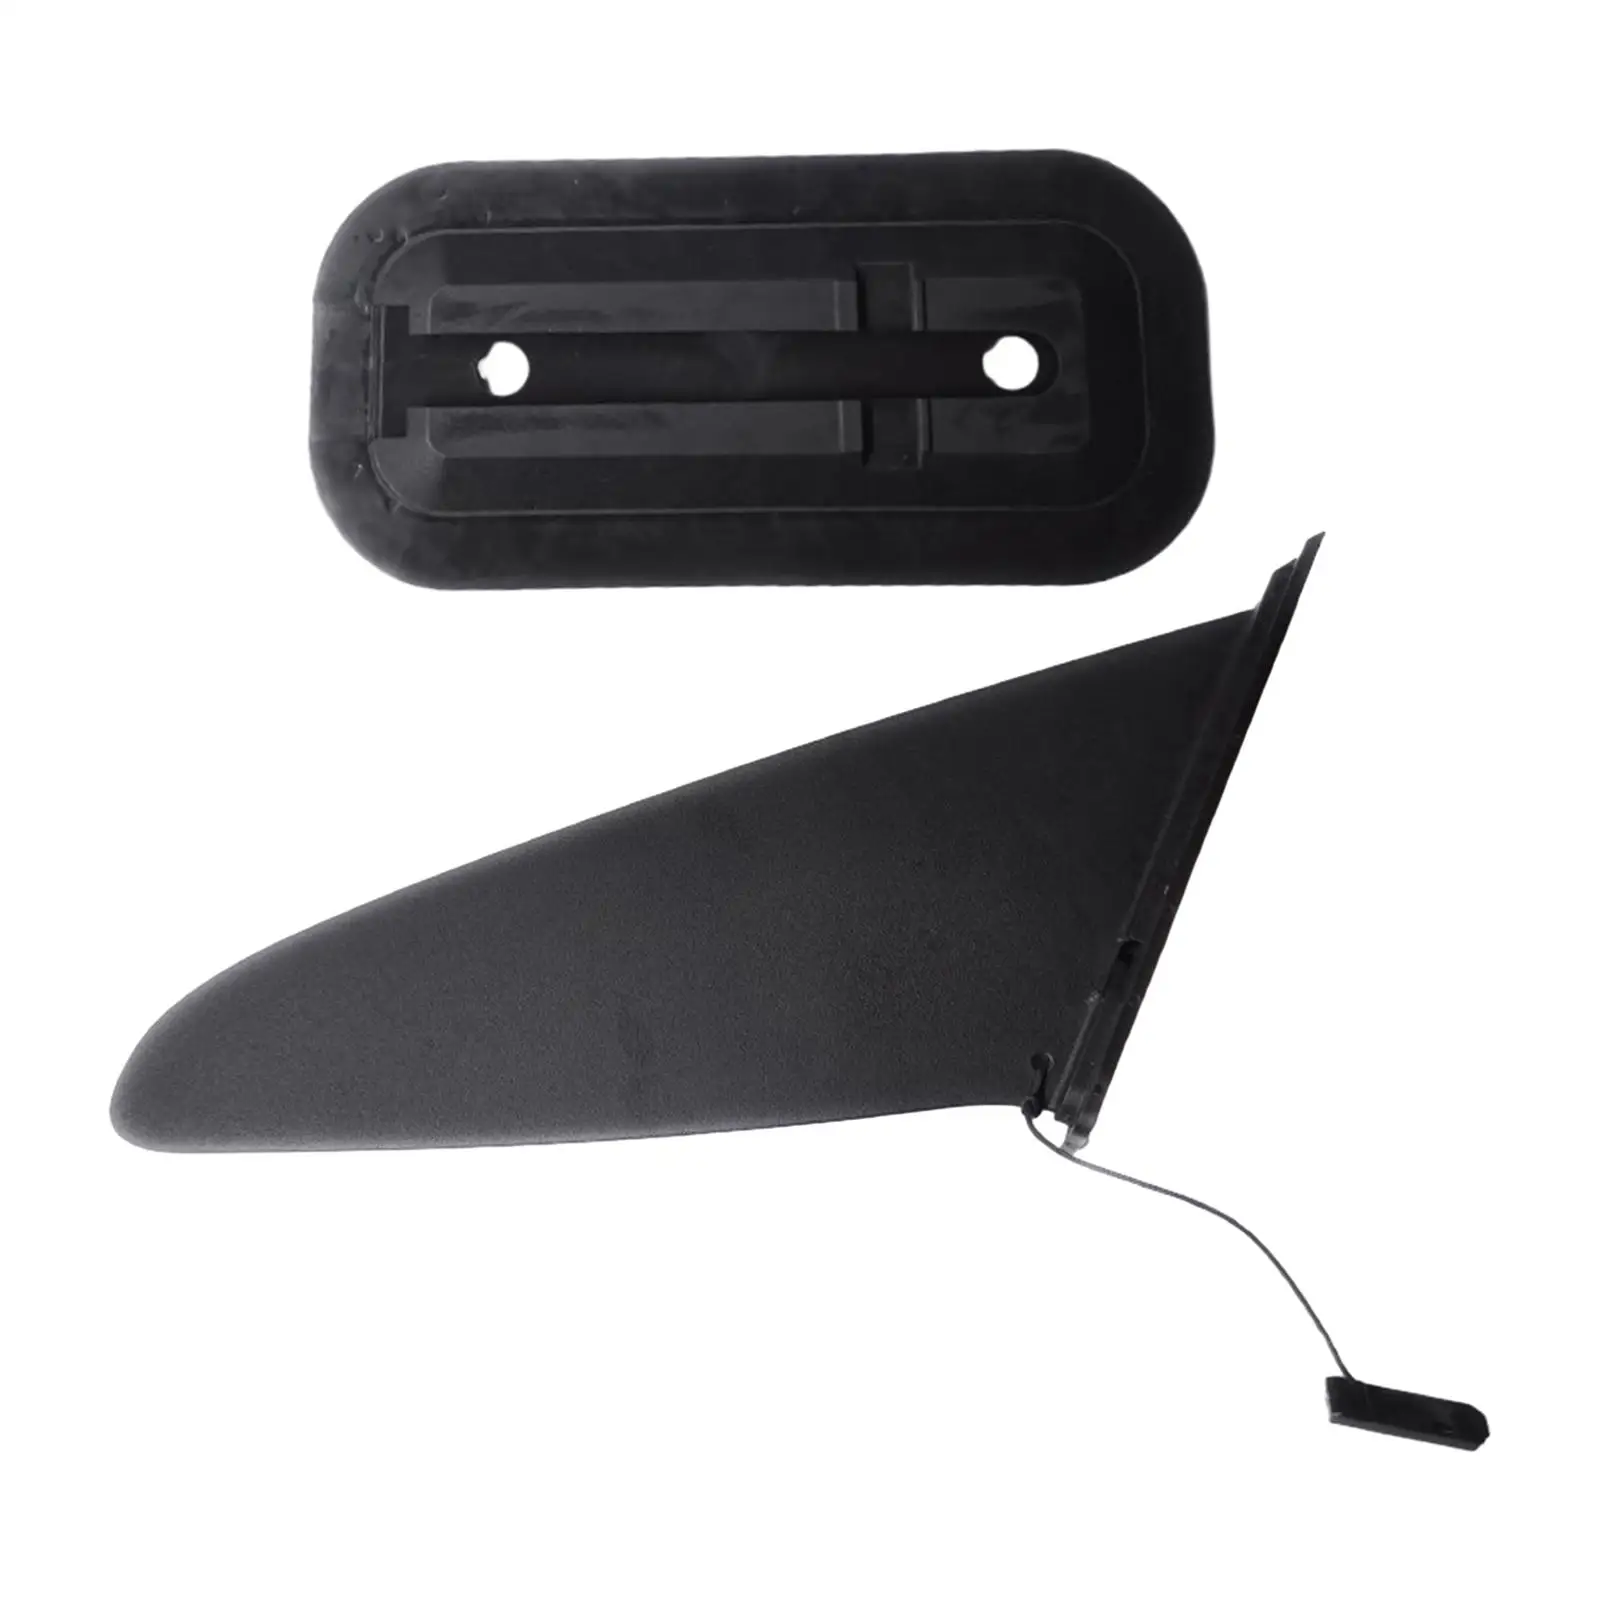 Surfboards Thruster Fin Surfing Fin Accessory Surfboard Tail Rudder Single Center Fin Tracking Tail for Dinghy Pool Canoe